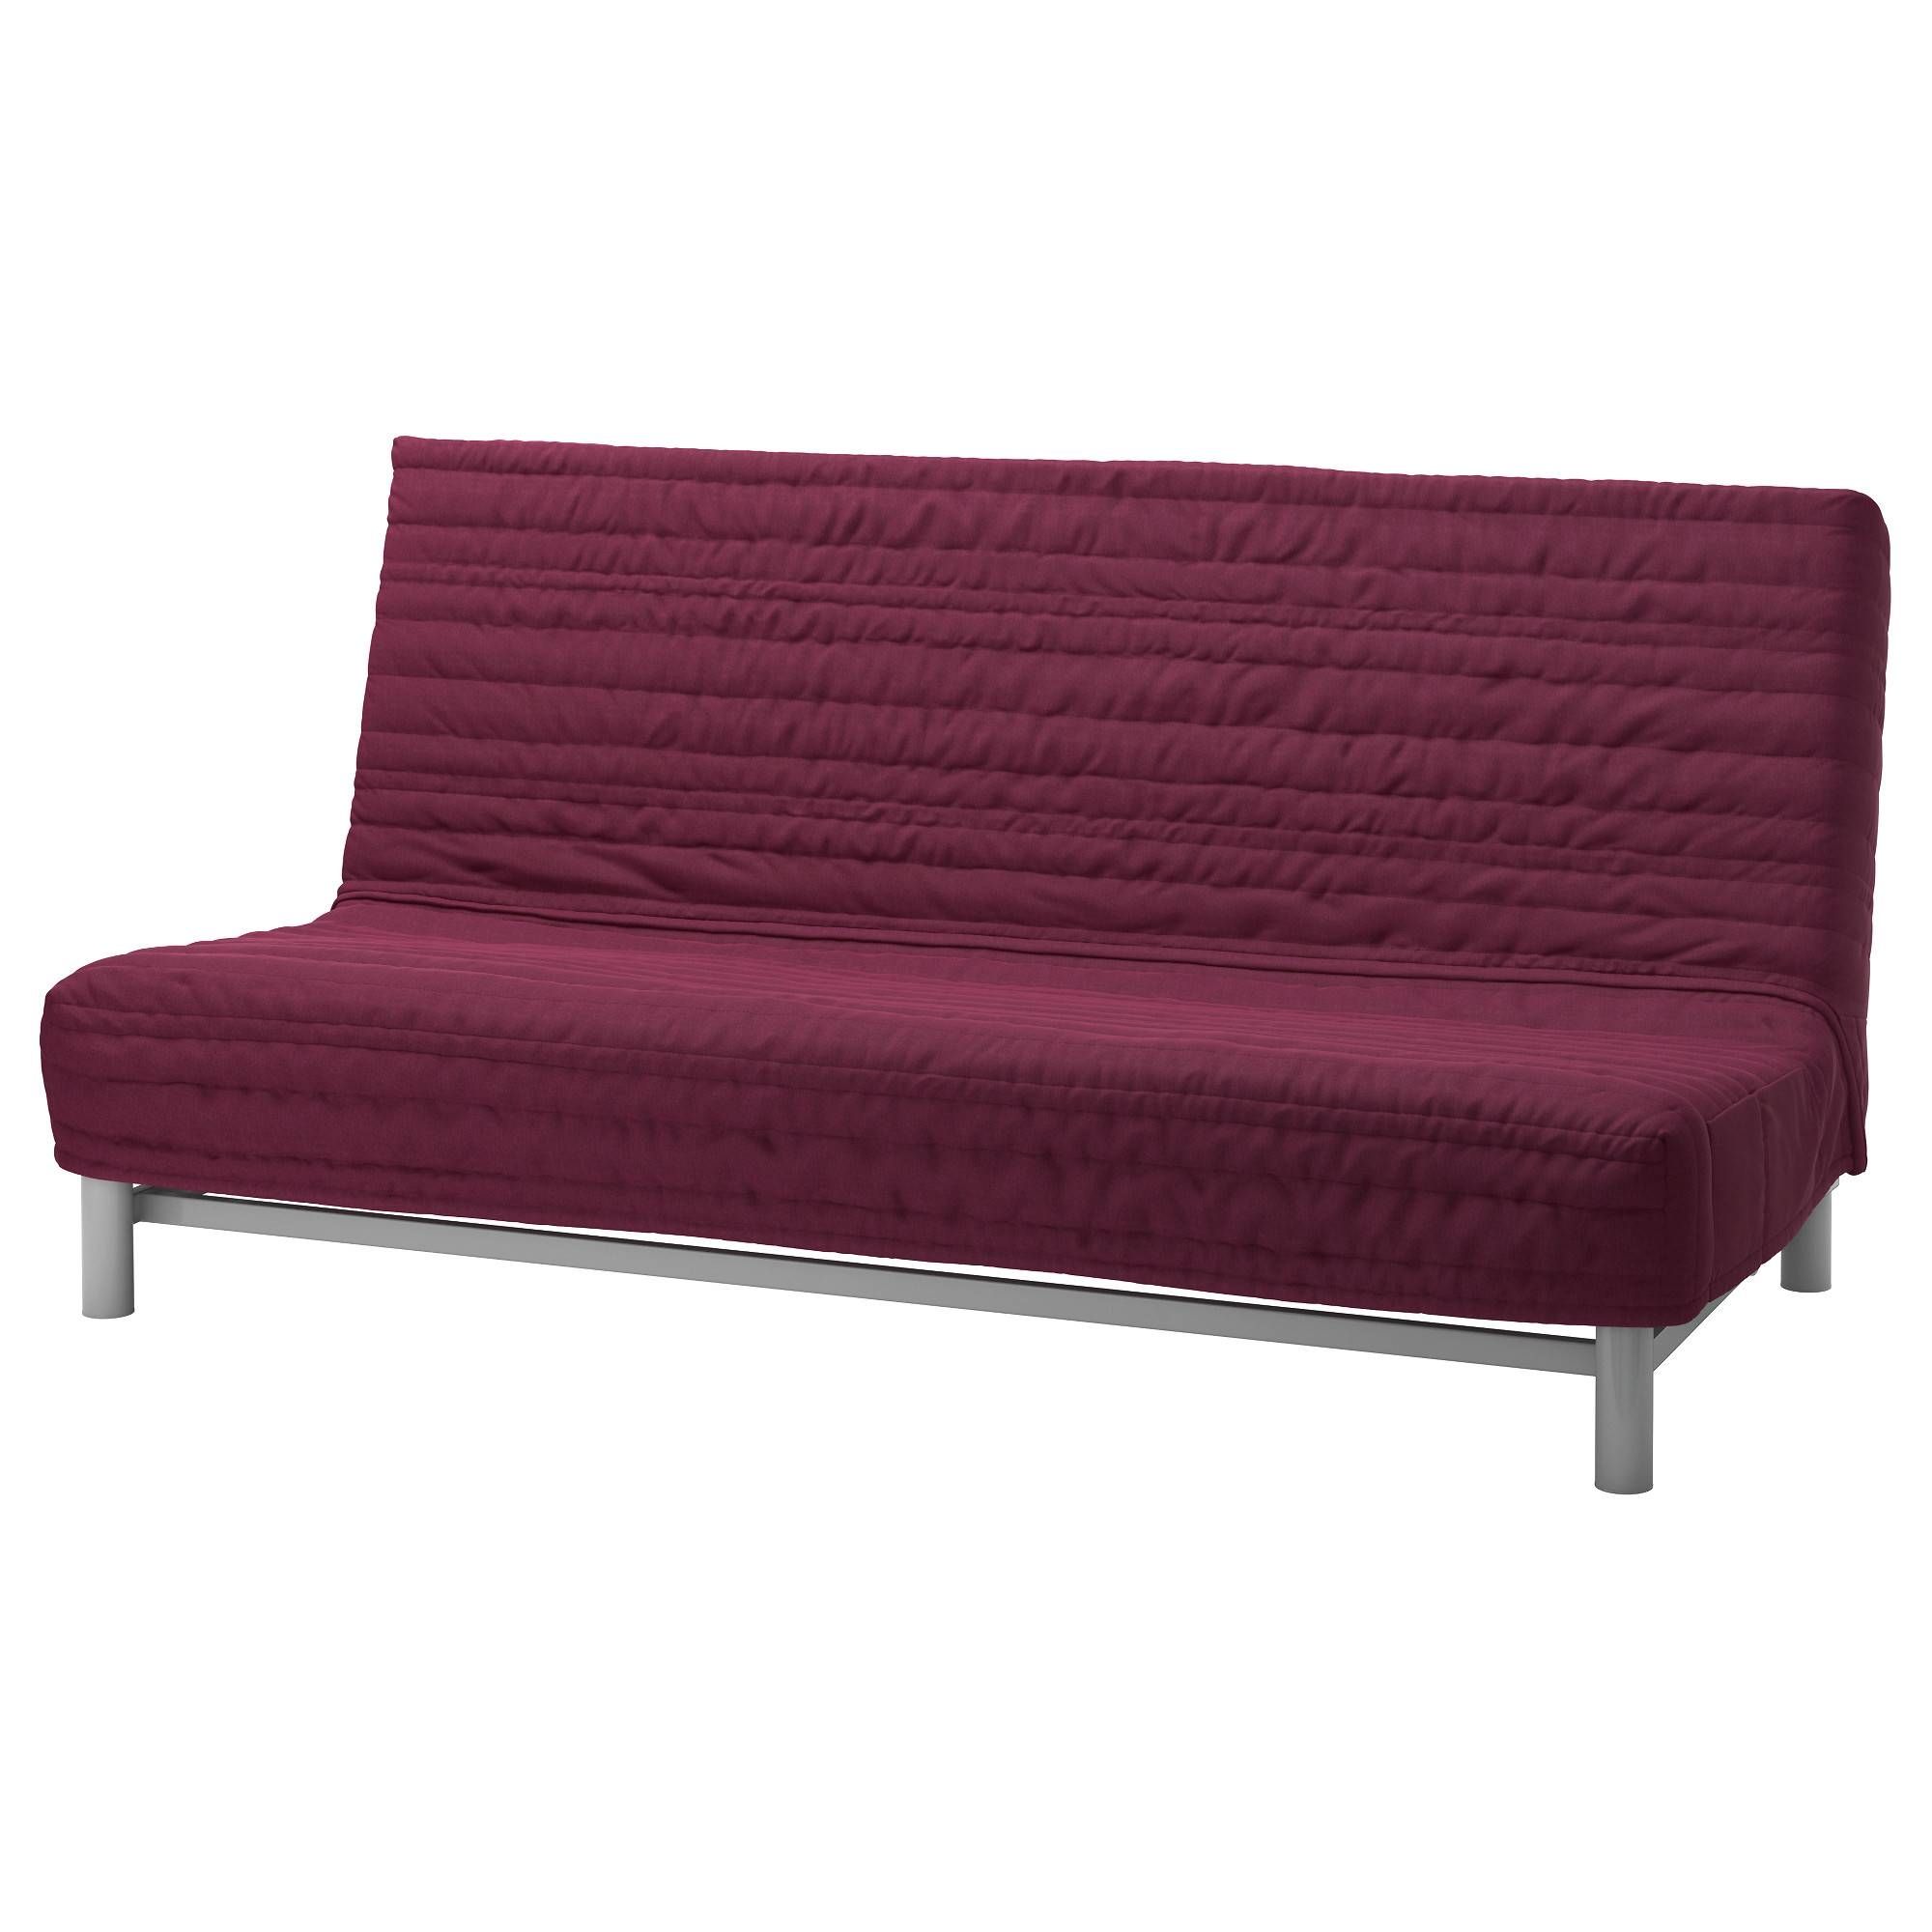 Sofa Beds & Futons | Ikea Within Red Sofa Beds Ikea (View 12 of 30)